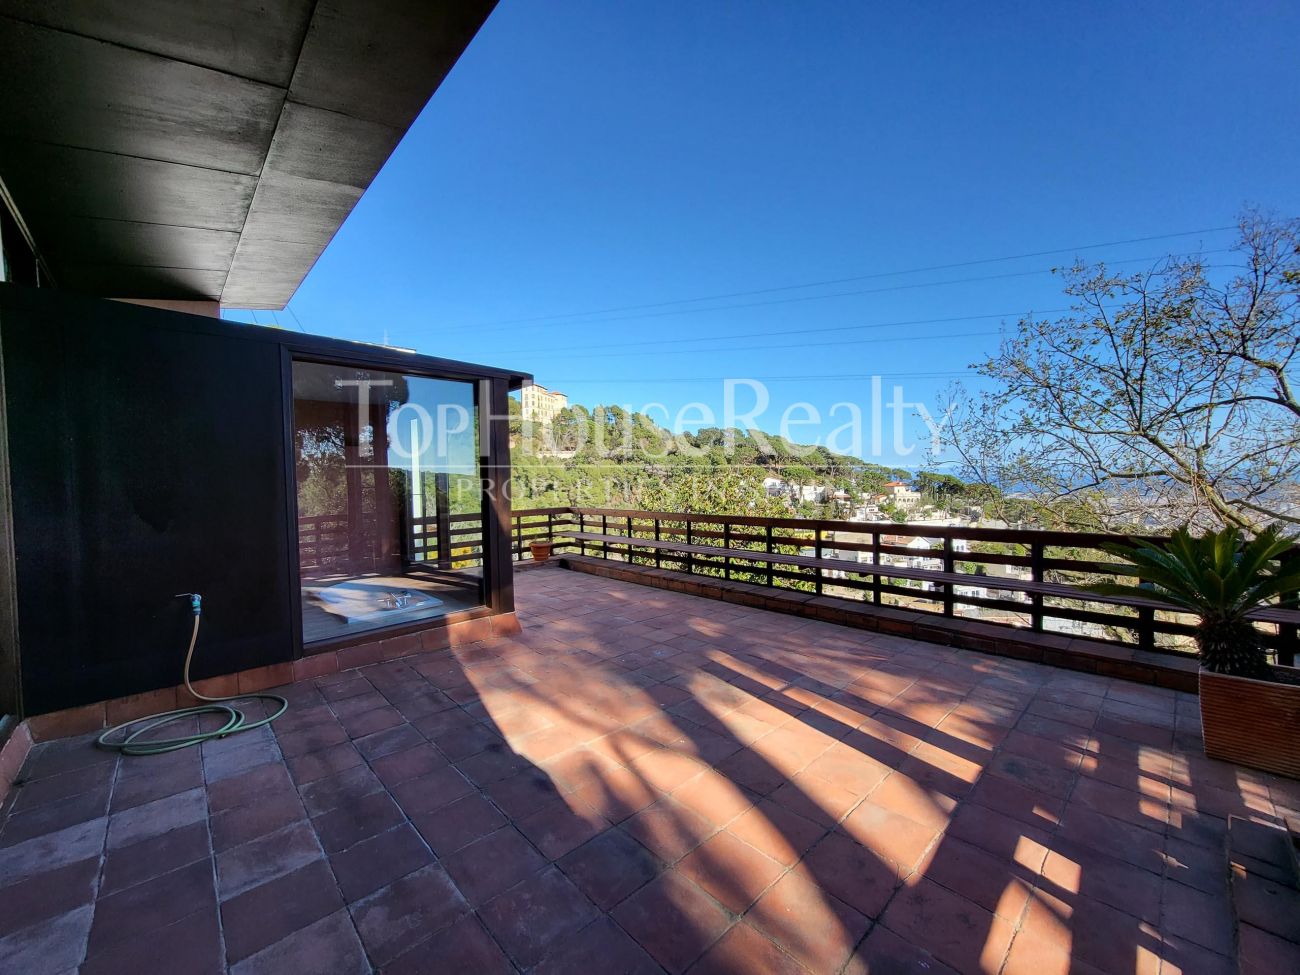 Enjoy the tranquility of Tibidabo in this stunning designer house